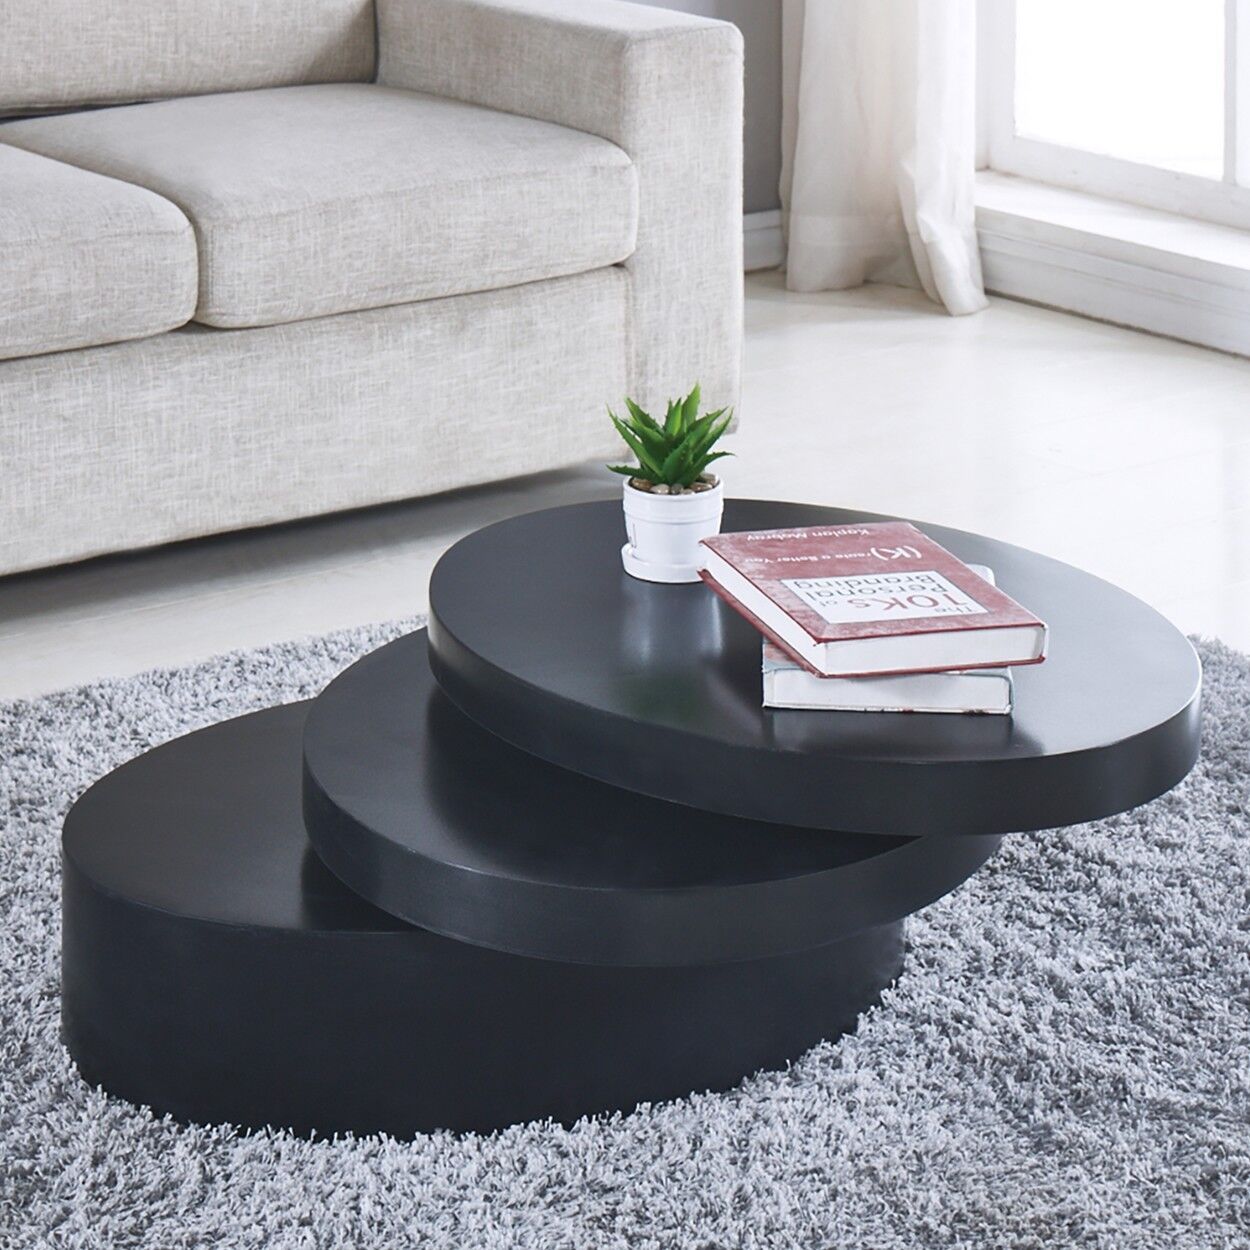 Round Black Coffee Table Rotating Contemporary 3 Layers Living Room For Full Black Round Coffee Tables (View 15 of 15)